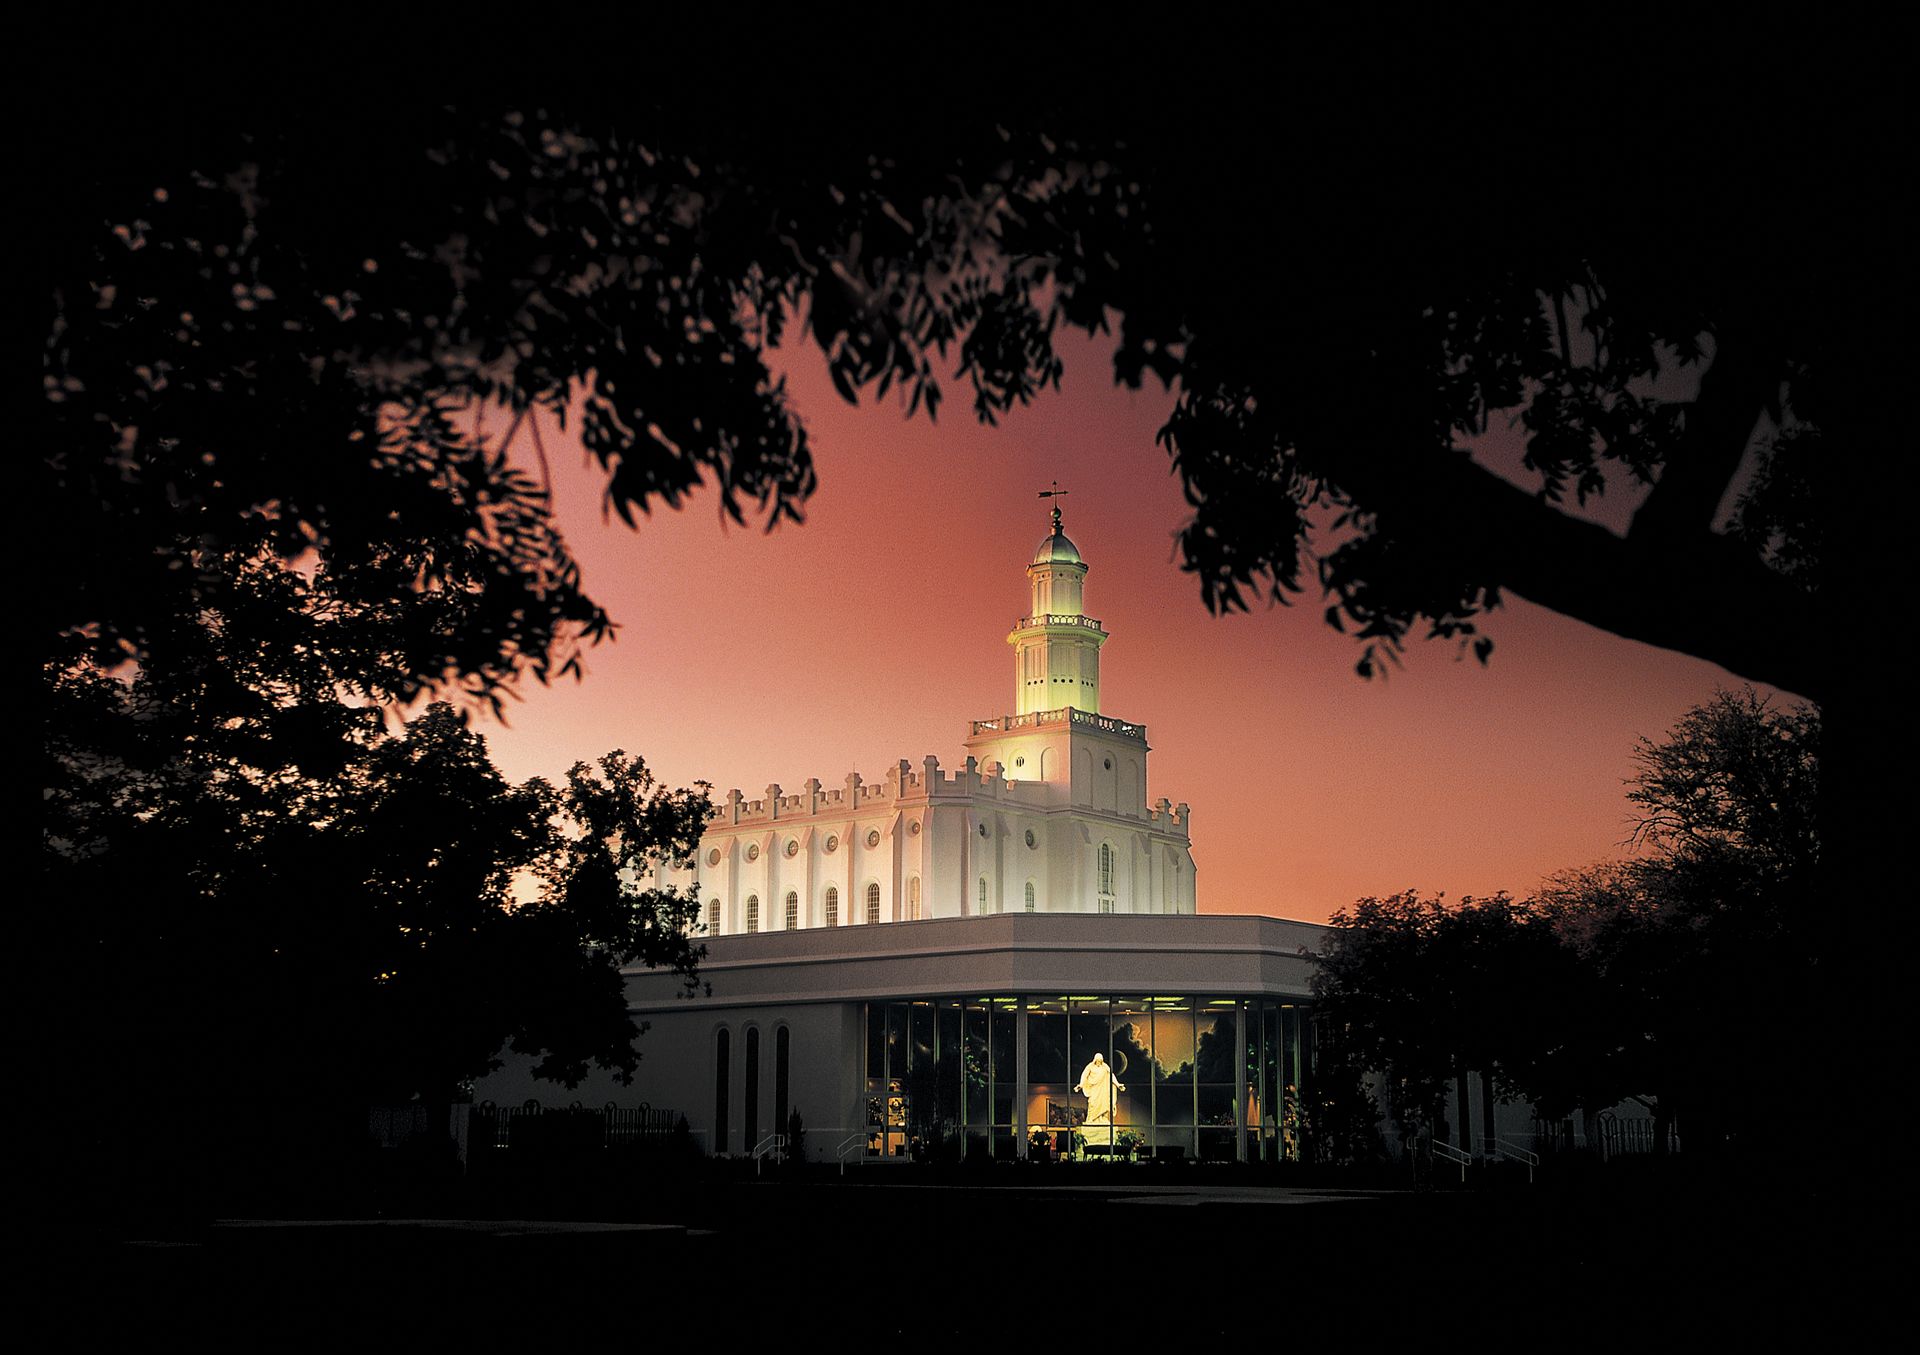 The St. George Utah Temple in the evening, including the entrance and scenery.